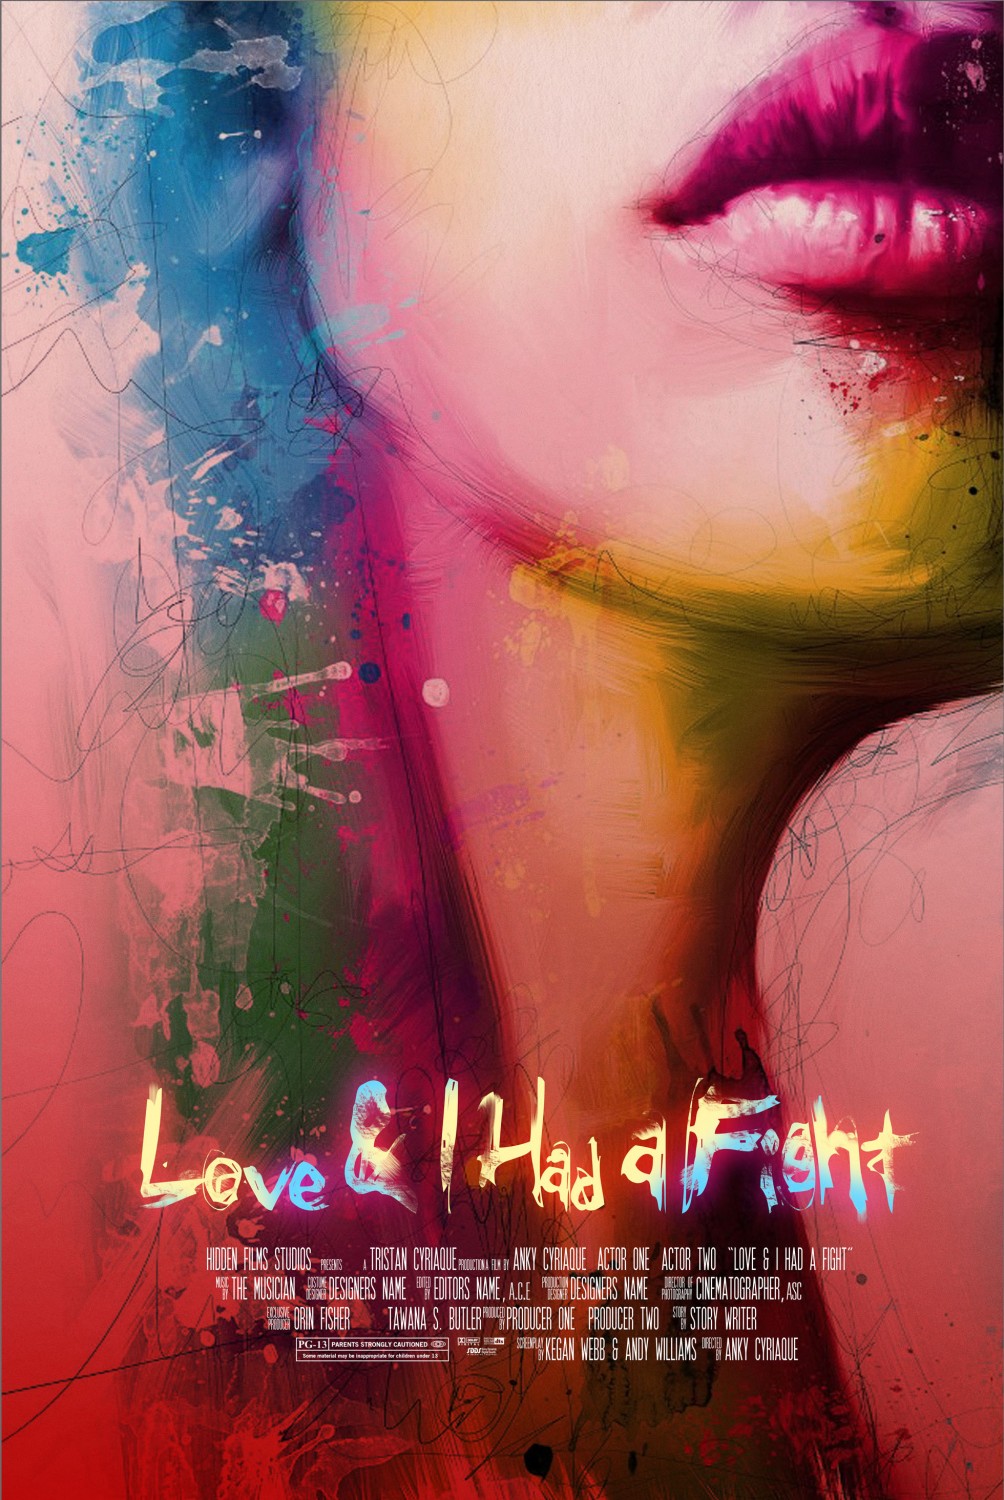 Extra Large Movie Poster Image for Love & I Had A Fight